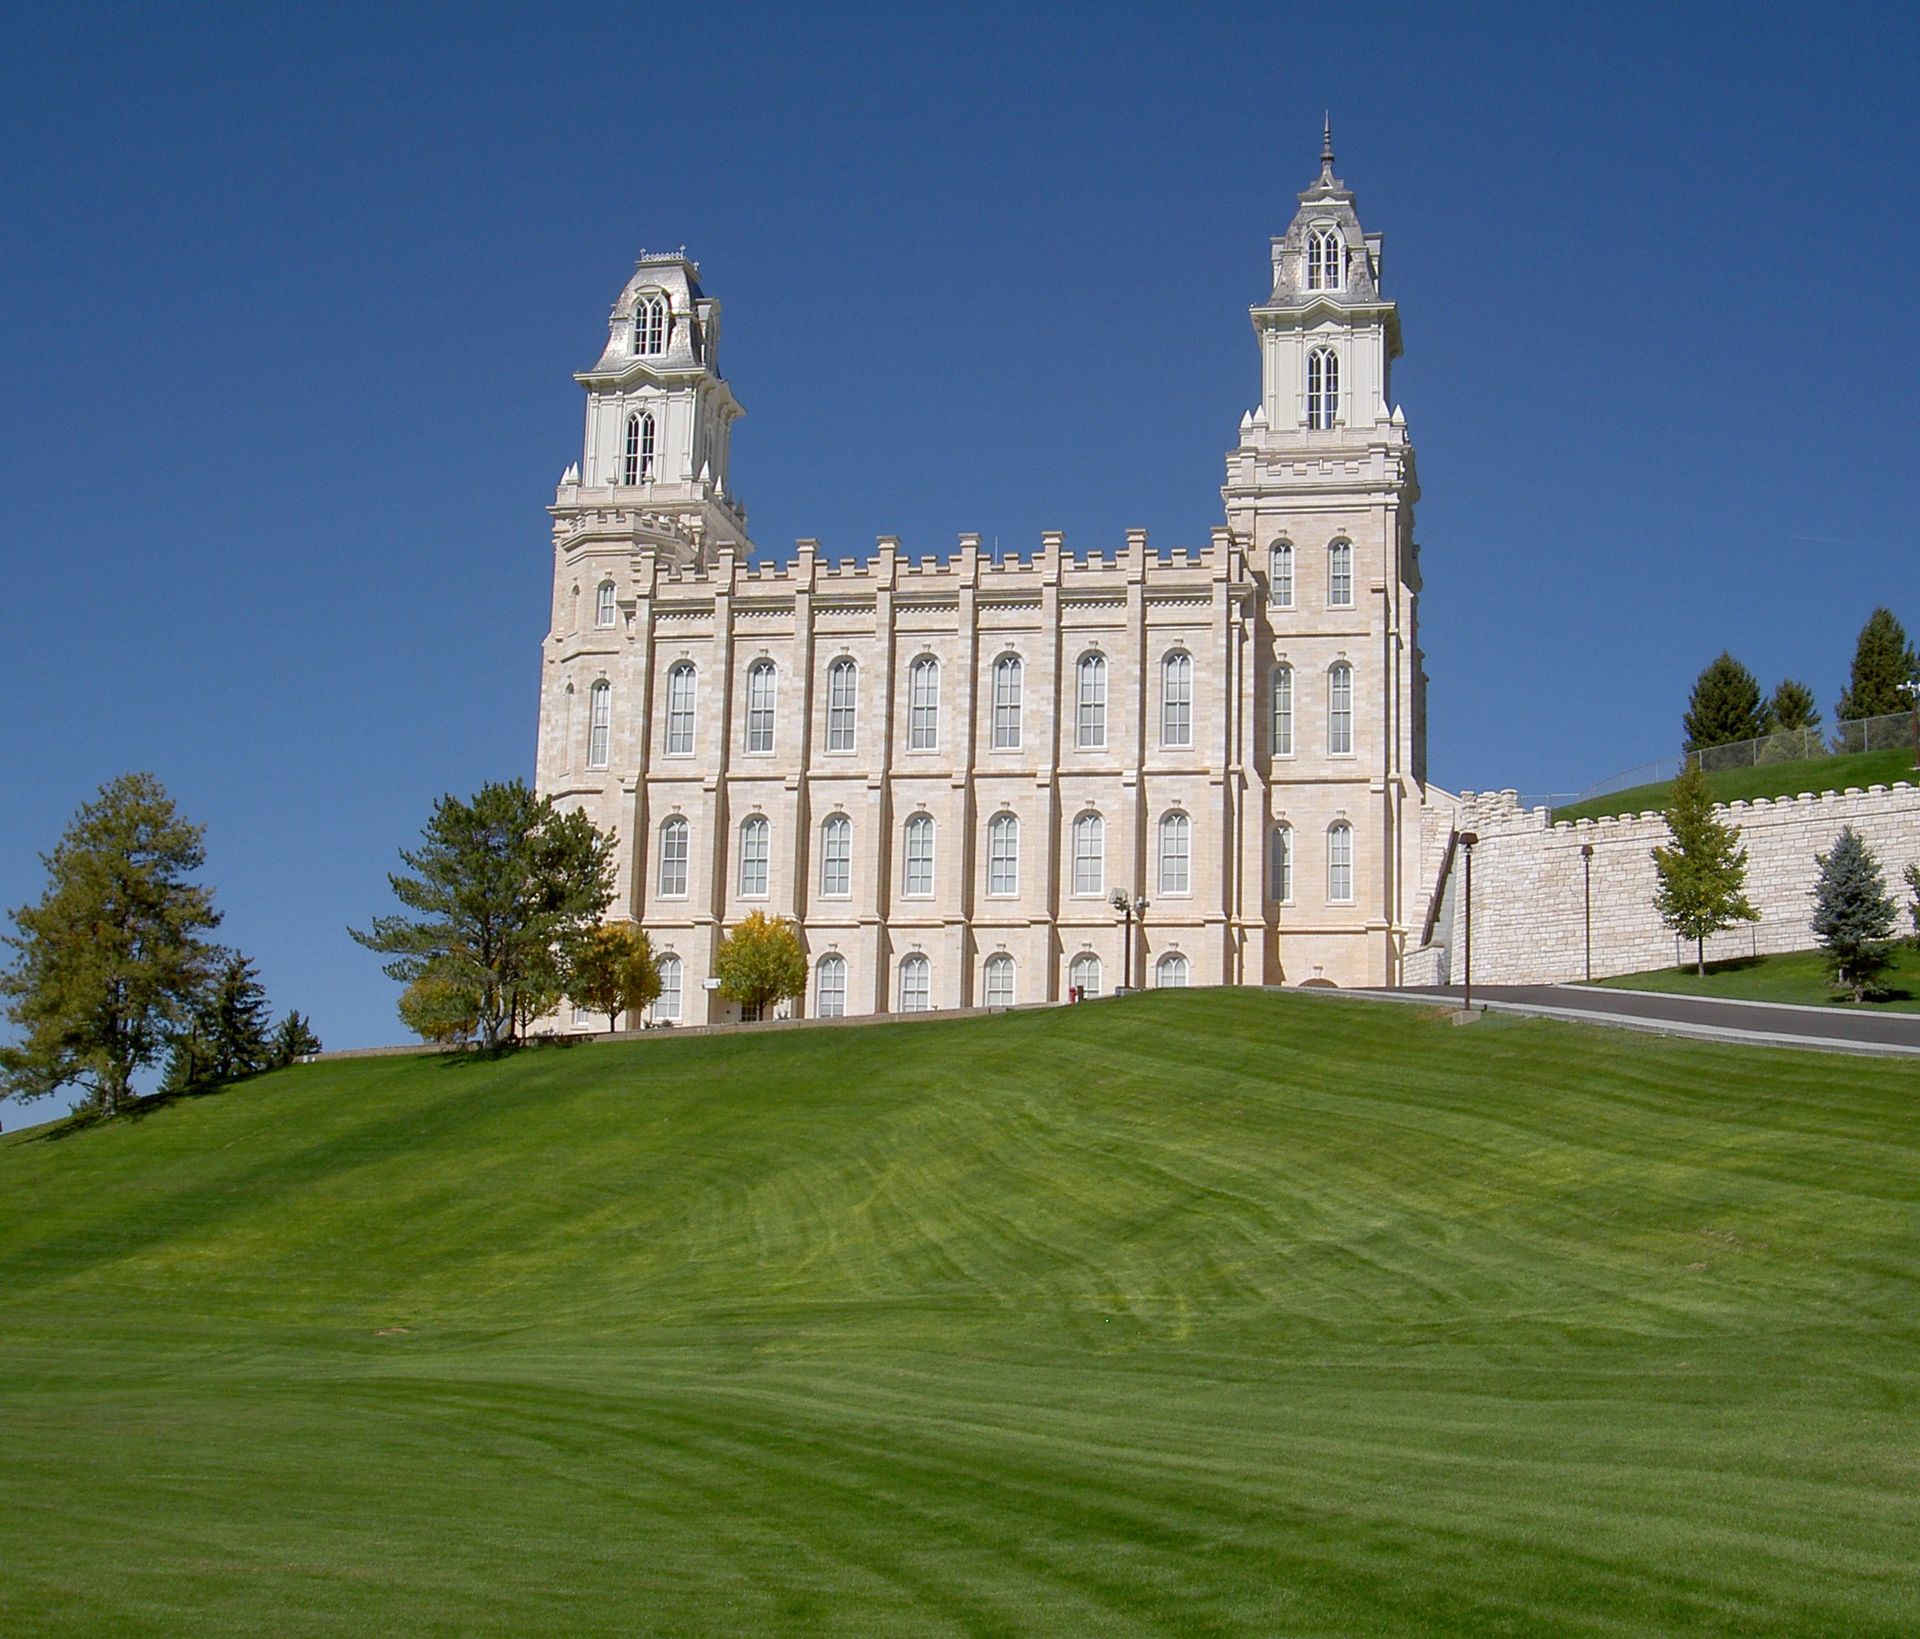 The Manti Utah Temple south side, including scenery.